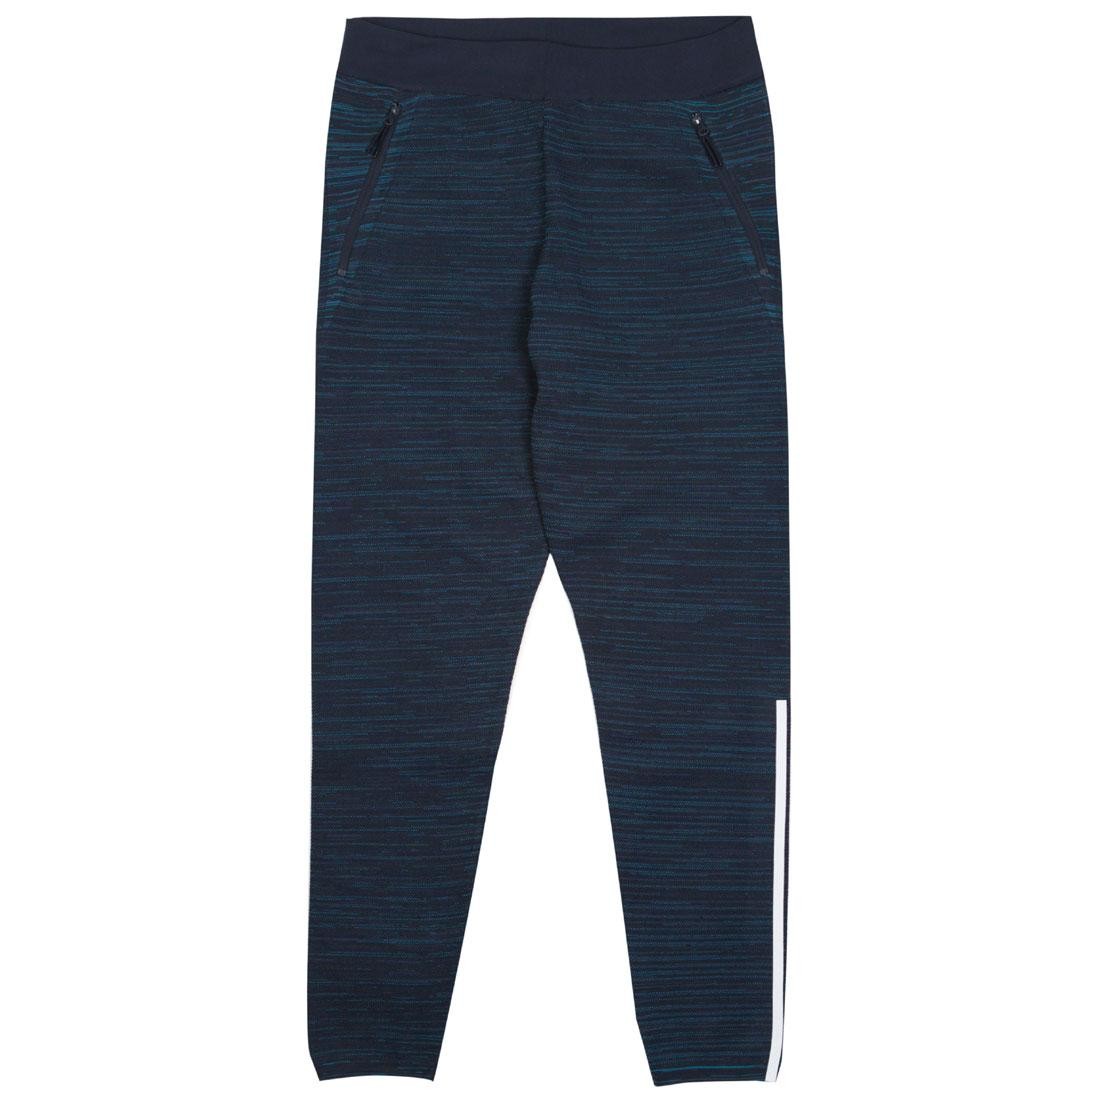 adidas parley zne joggers in navy